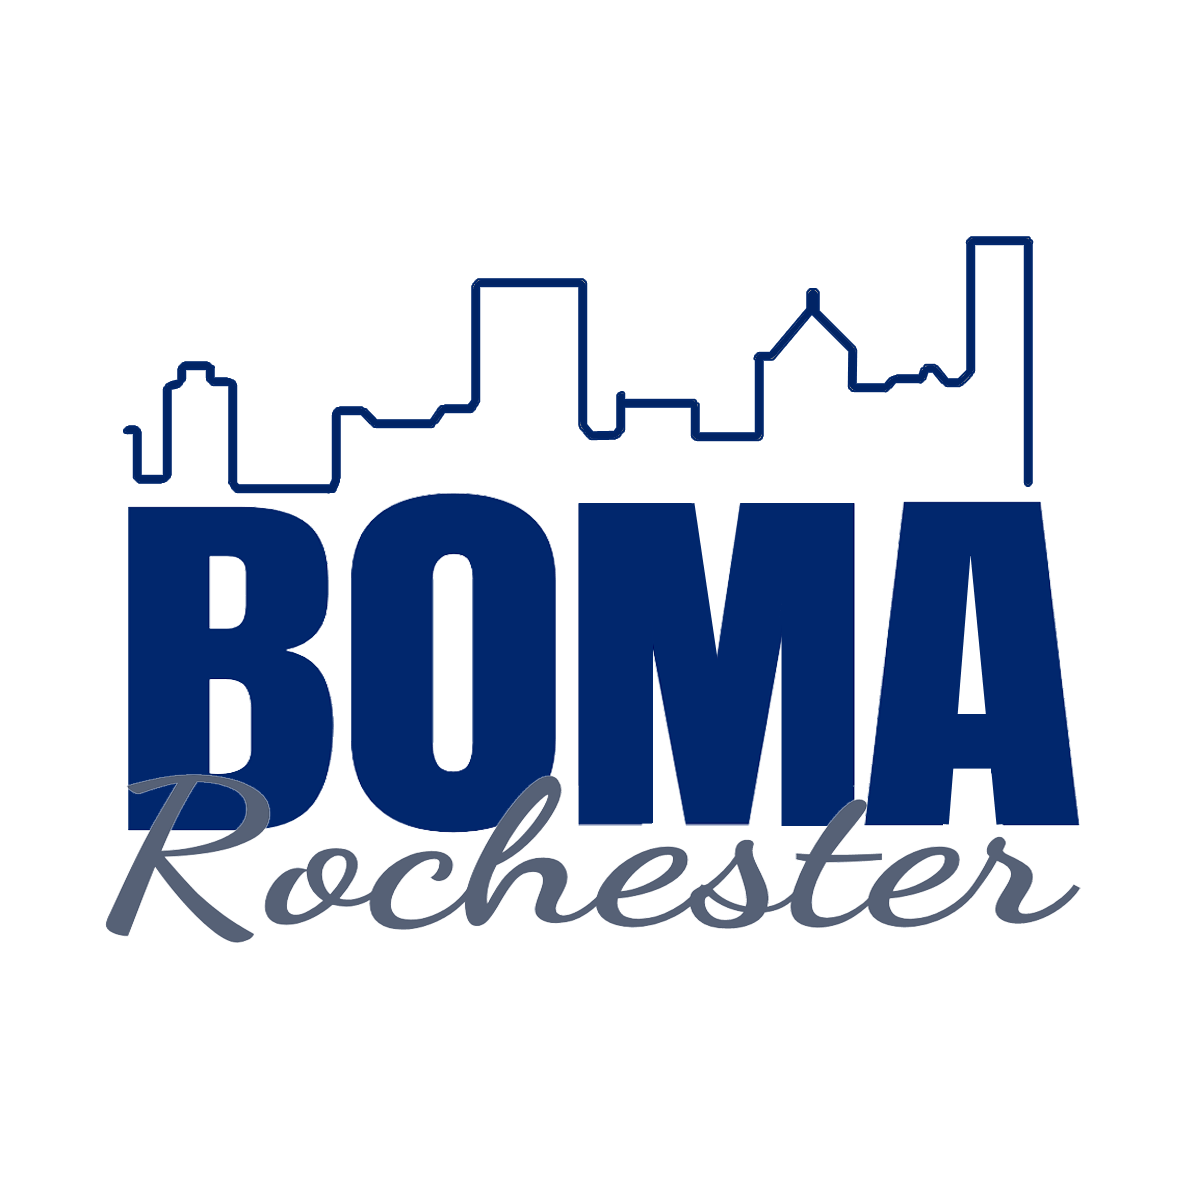 Rochester Logo - BOMA Rochester: Representing the Greater Rochester commercial real